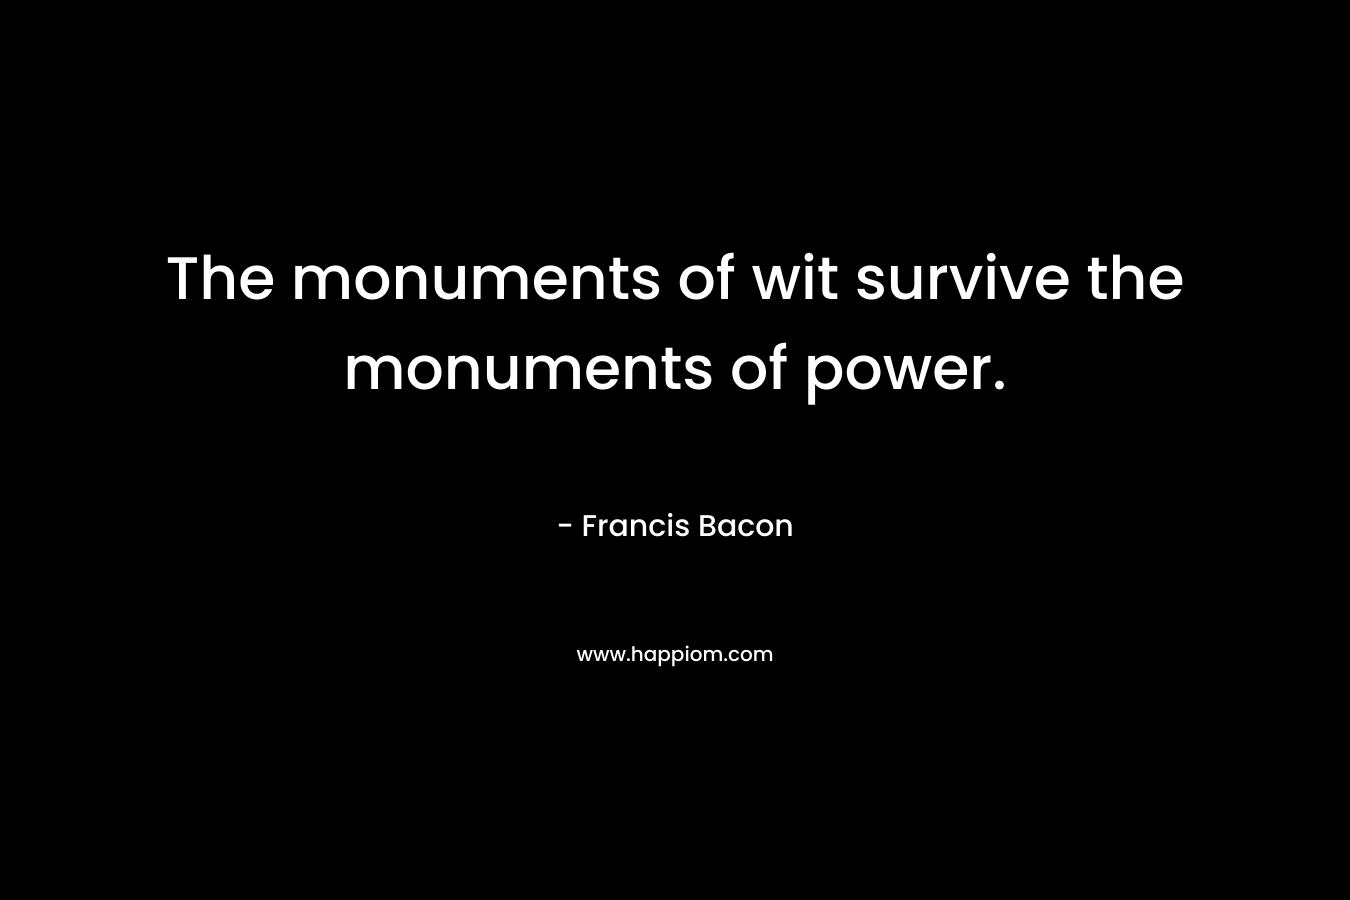 The monuments of wit survive the monuments of power.